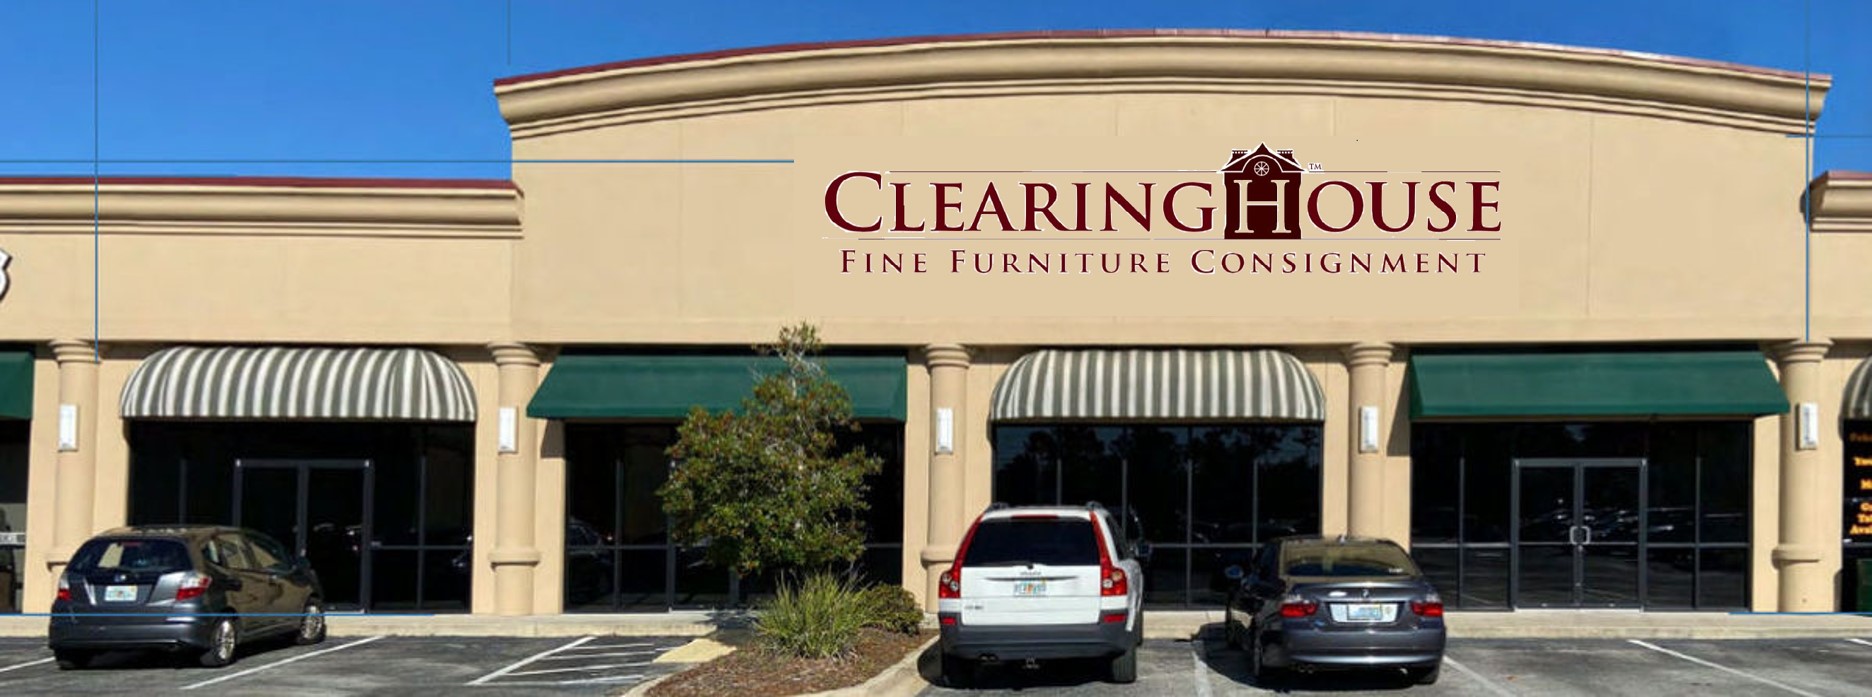 Clearing House Furniture Consignment